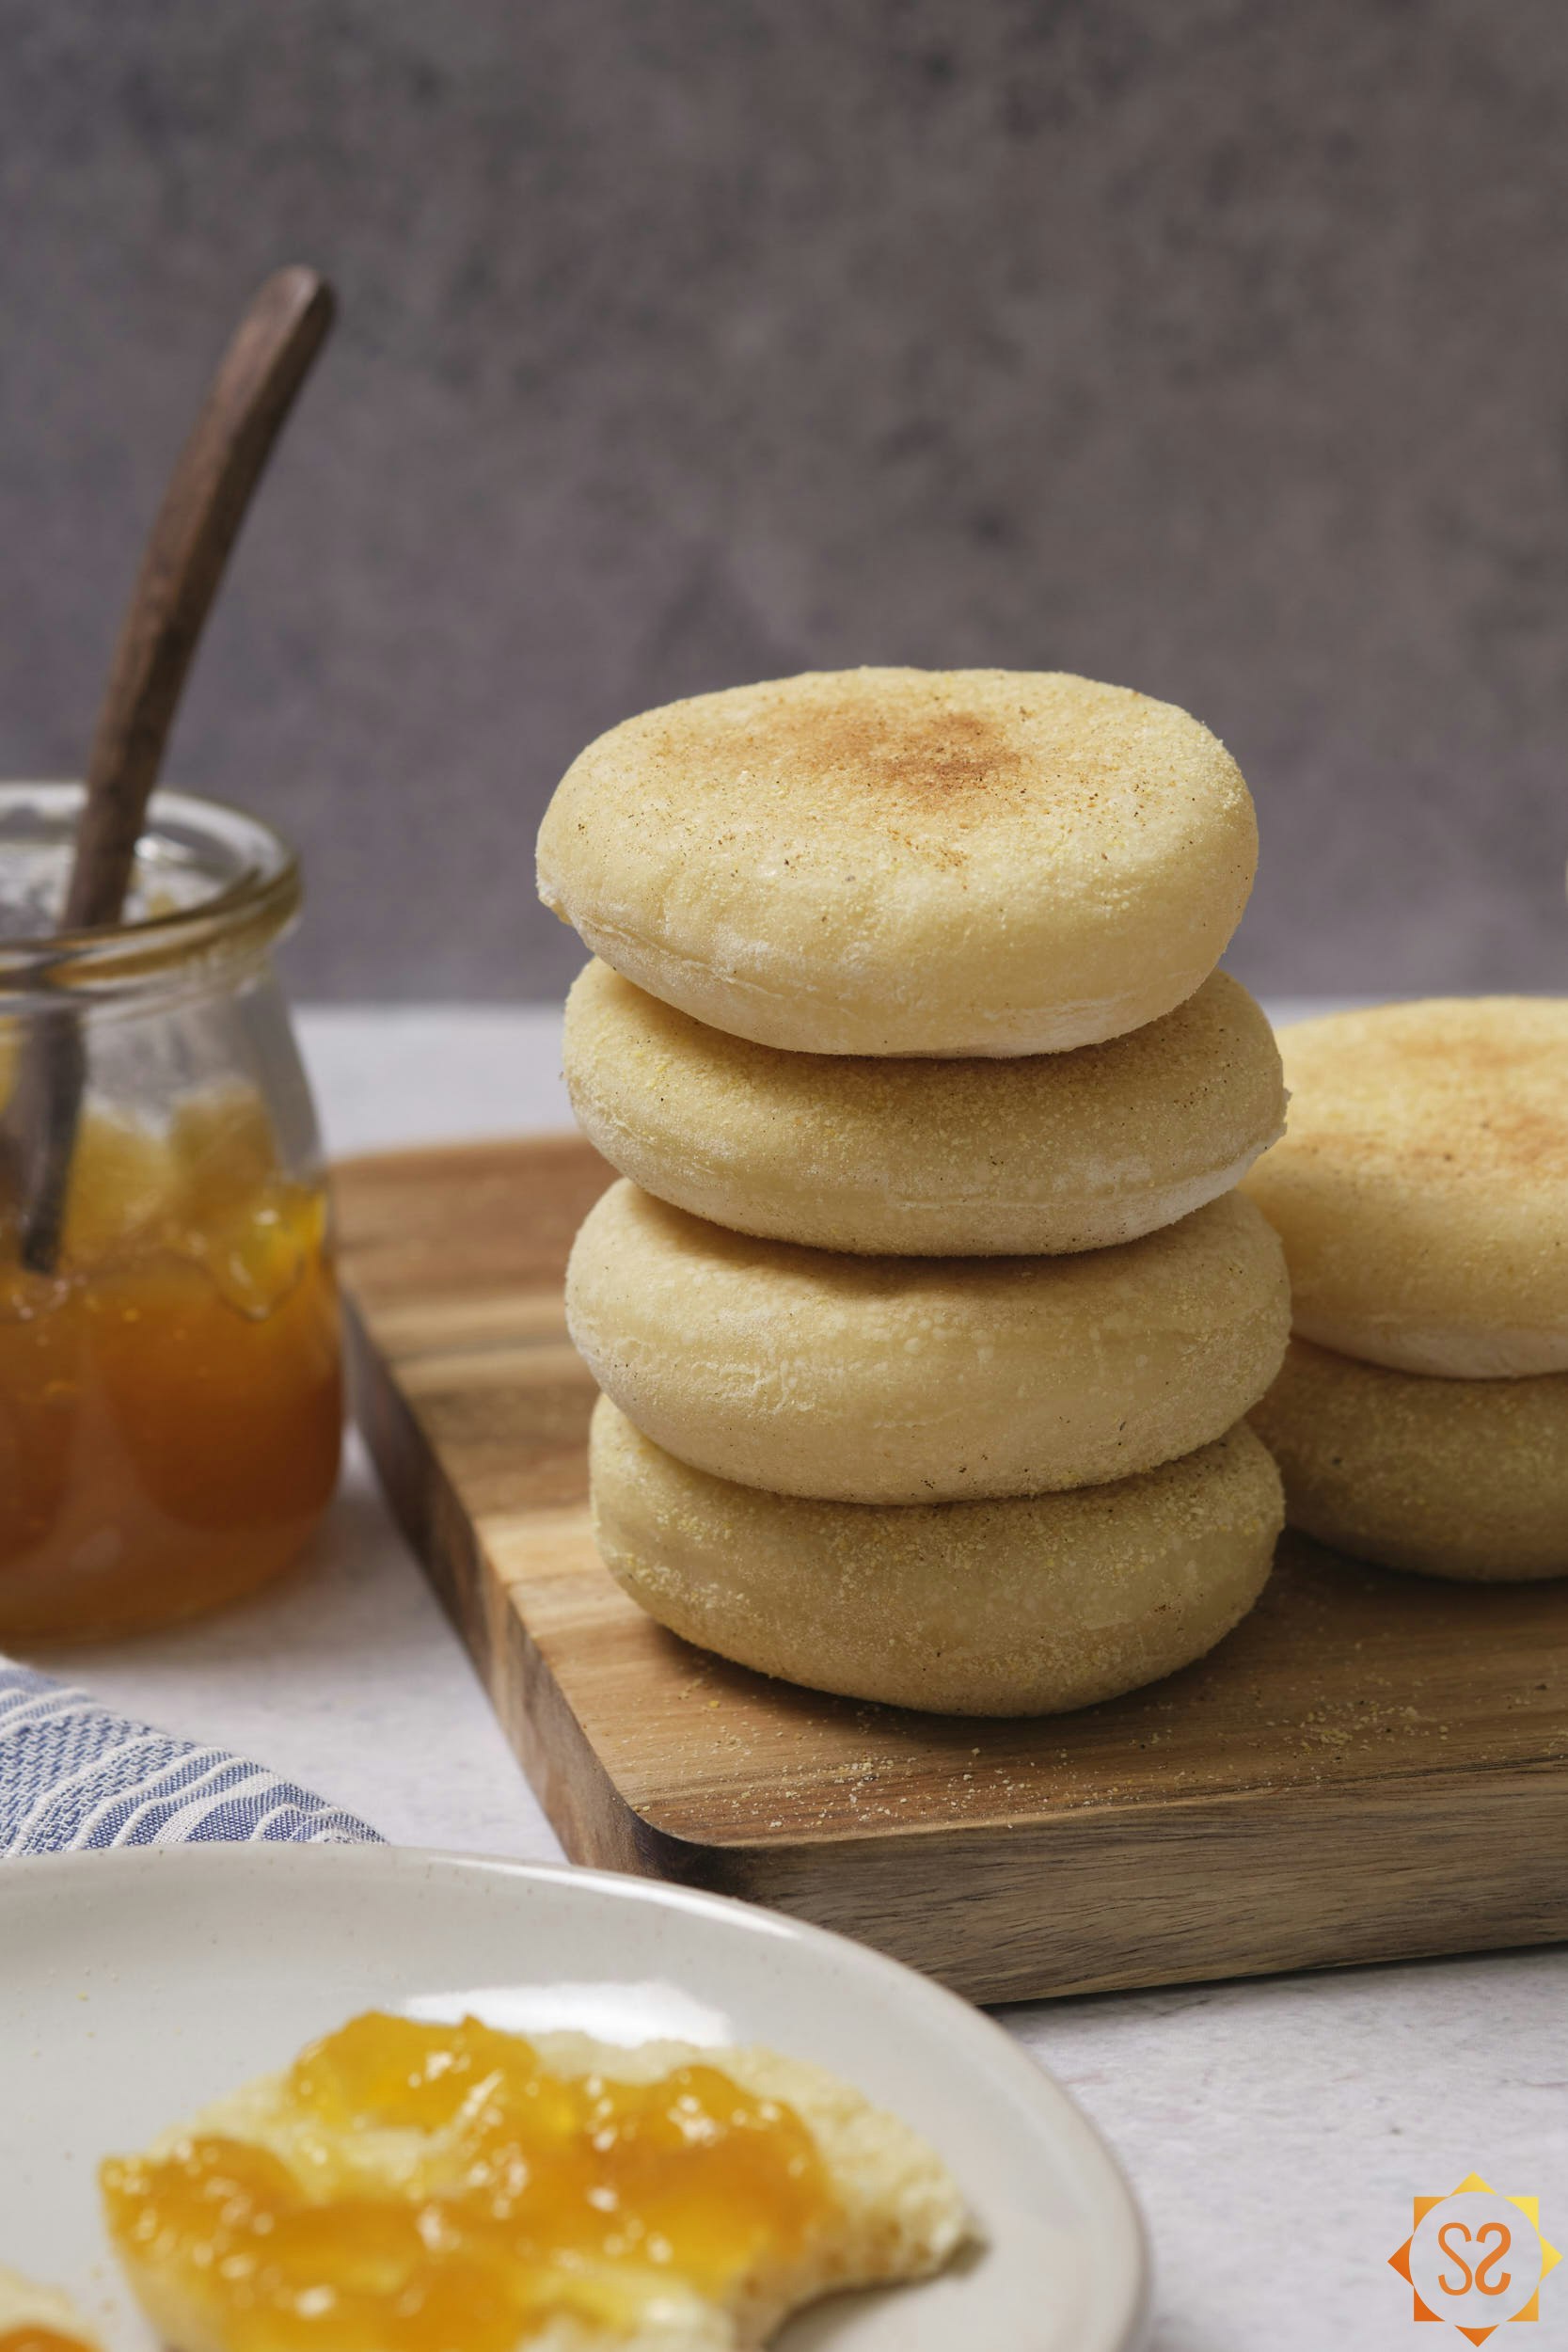 A stack of English muffins on a serving board, with a jar of jelly to the side and a cut English muffin topped with jelly to the front.